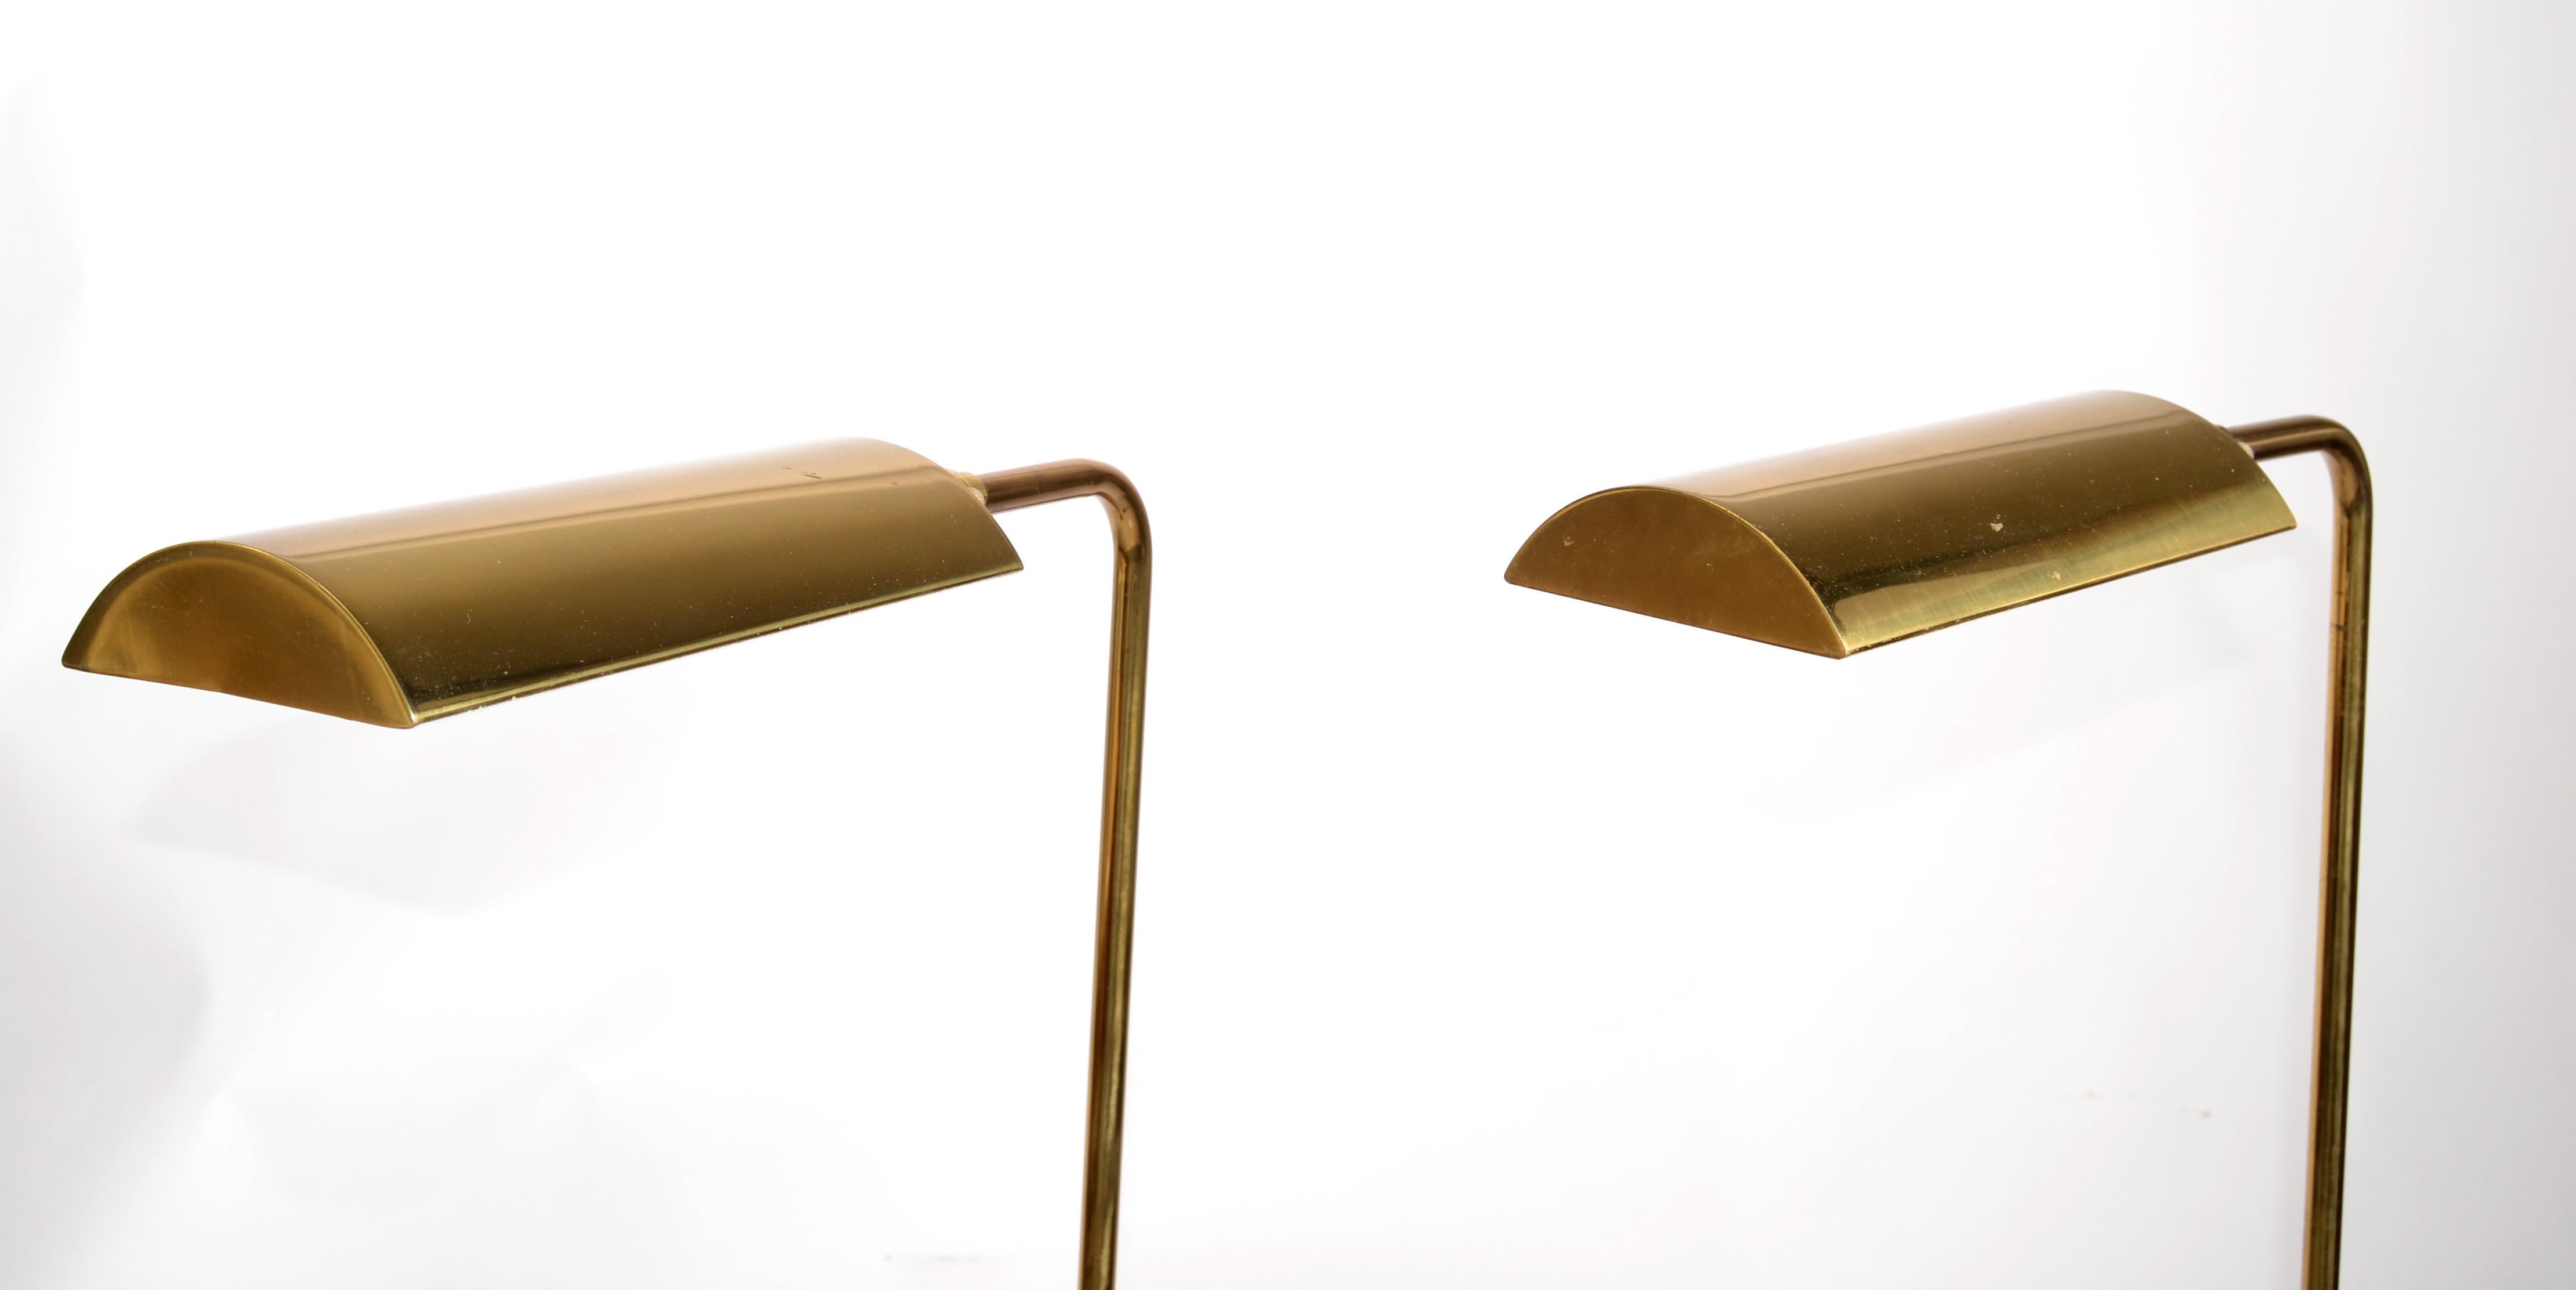 Pair Koch & Lowy Articulated Polished Brass Floor Lamps Mid-Century Modern 1965 For Sale 2